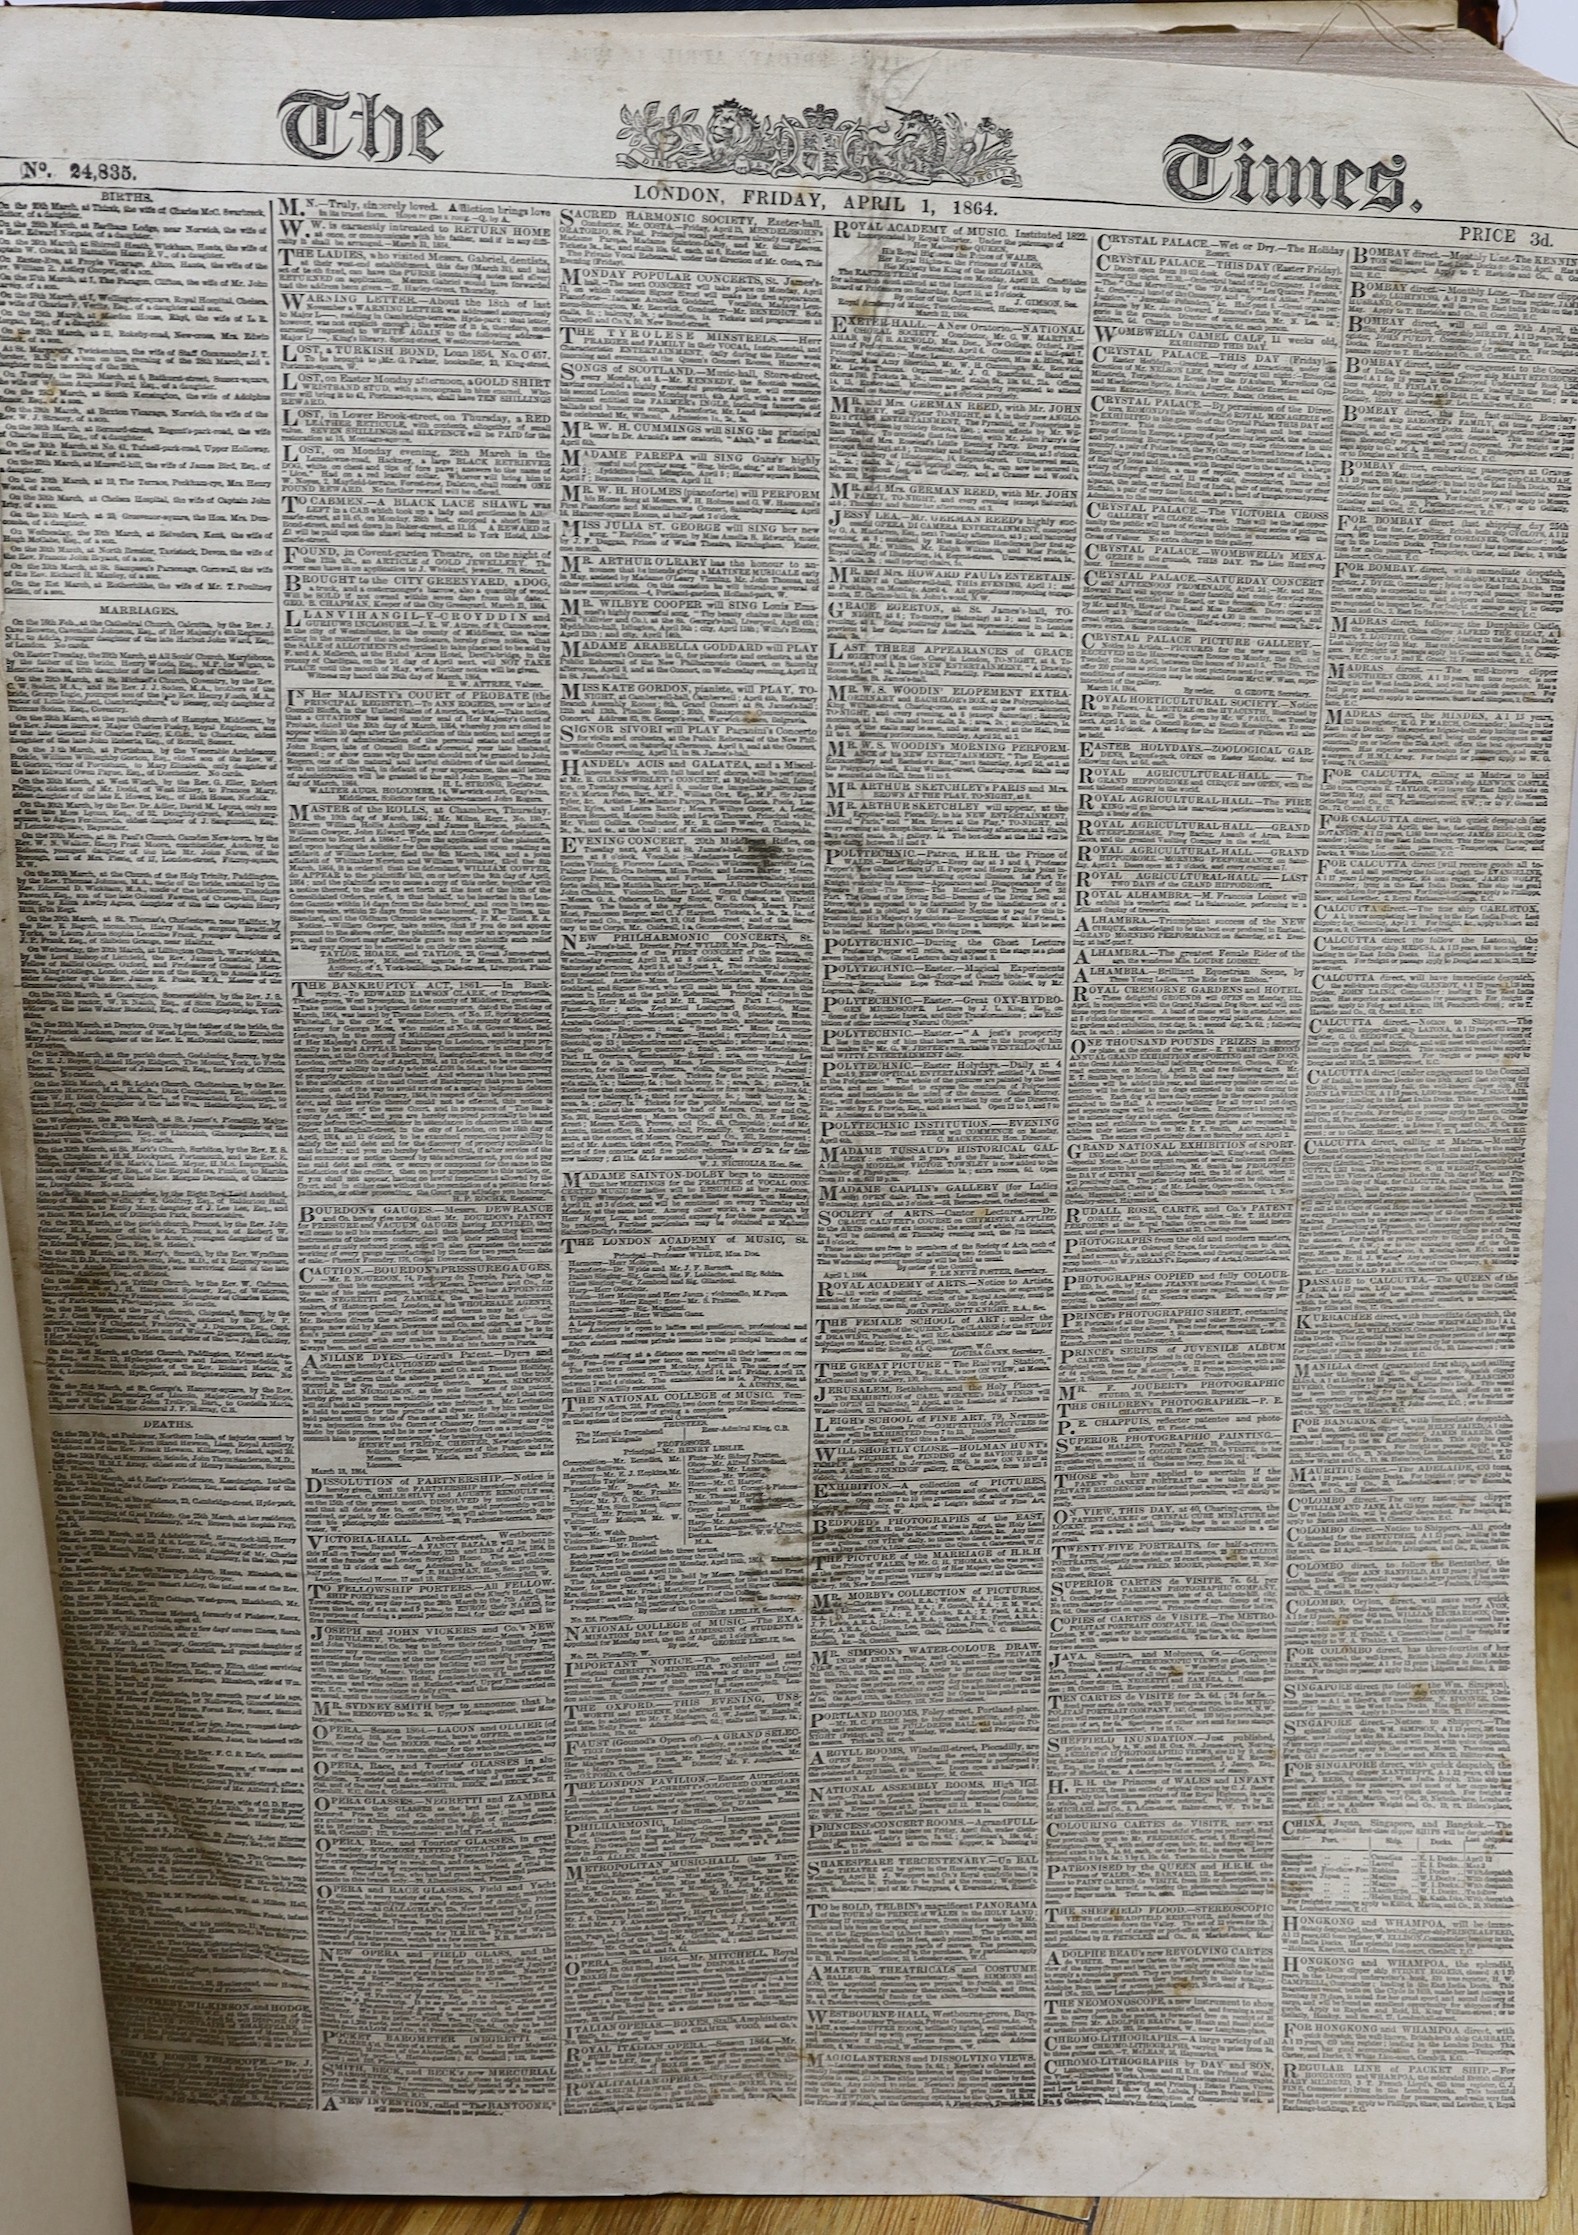 The Times 1864, bound